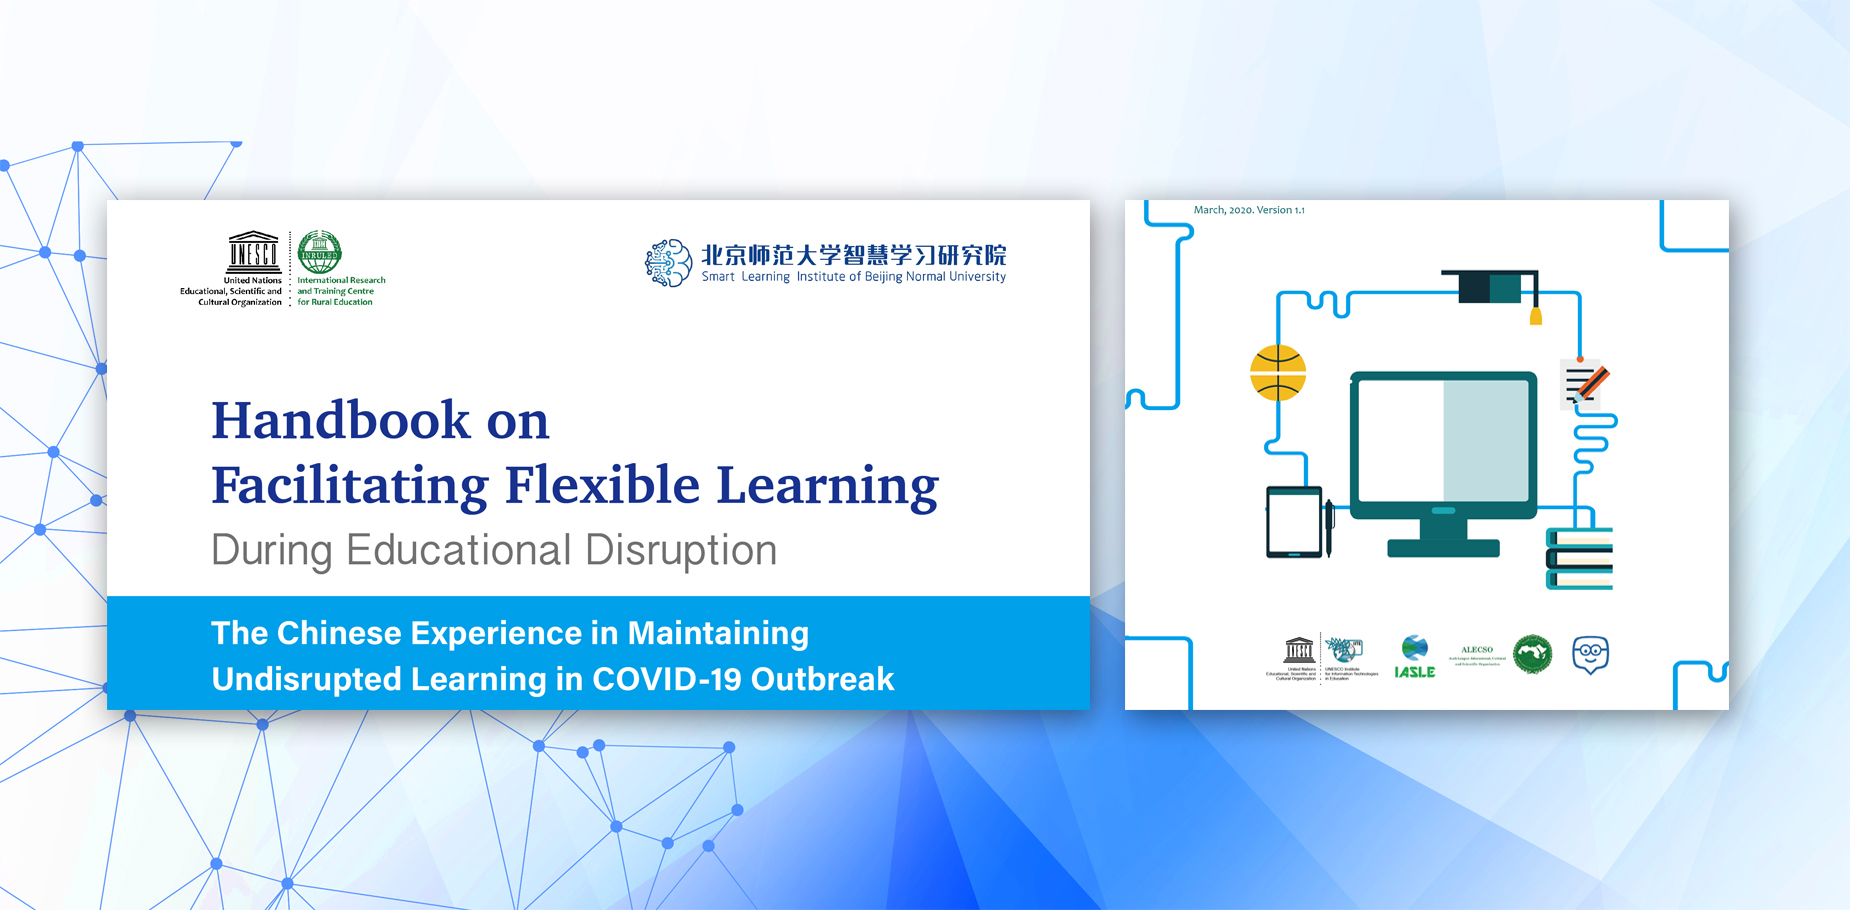 UNESCO IITE released the Handbook on Facilitating Flexible Learning During Educational Disruption: The Chinese Experience in Maintaining Undisrupted Learning in COVID-19 Outbreak